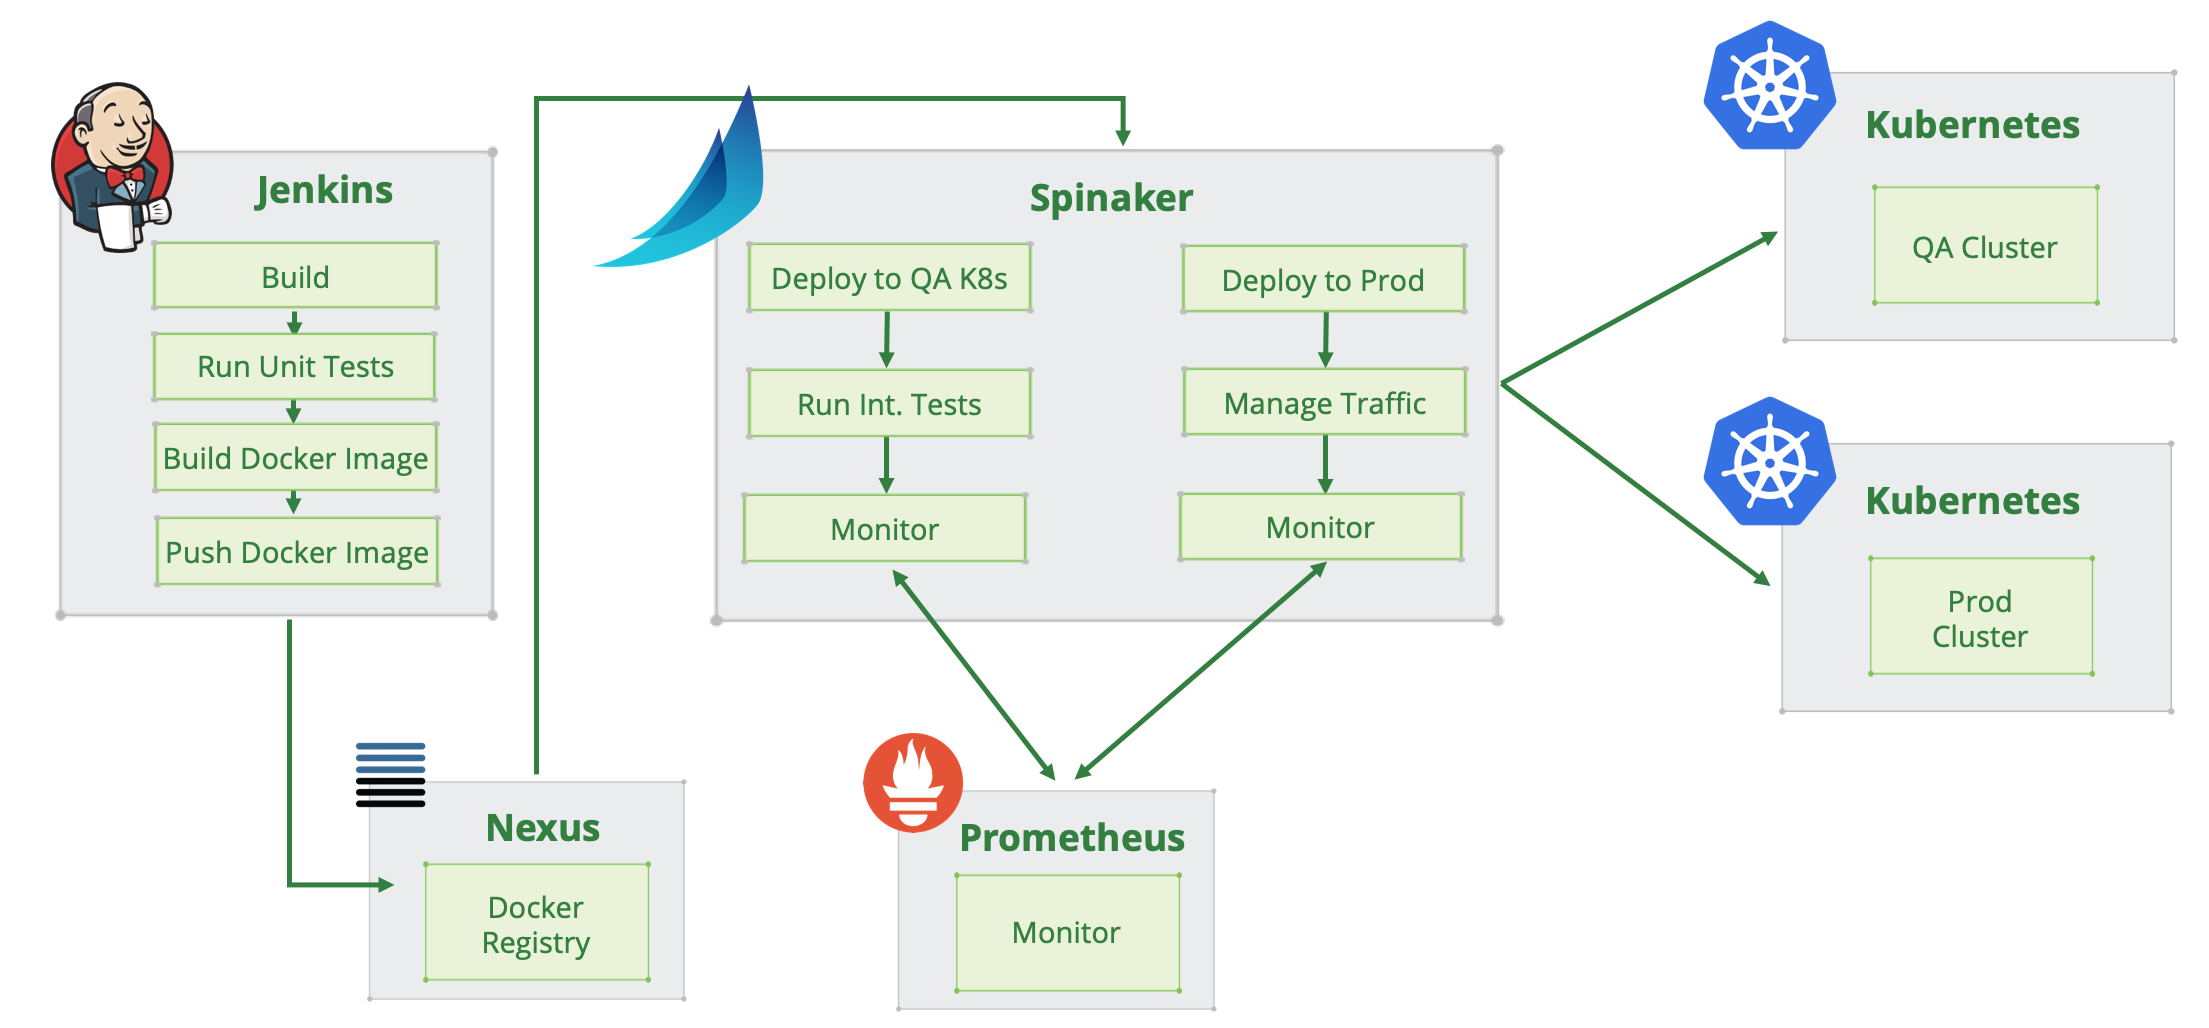 Spinnakers-role-in-a-CIDC-workflow.png